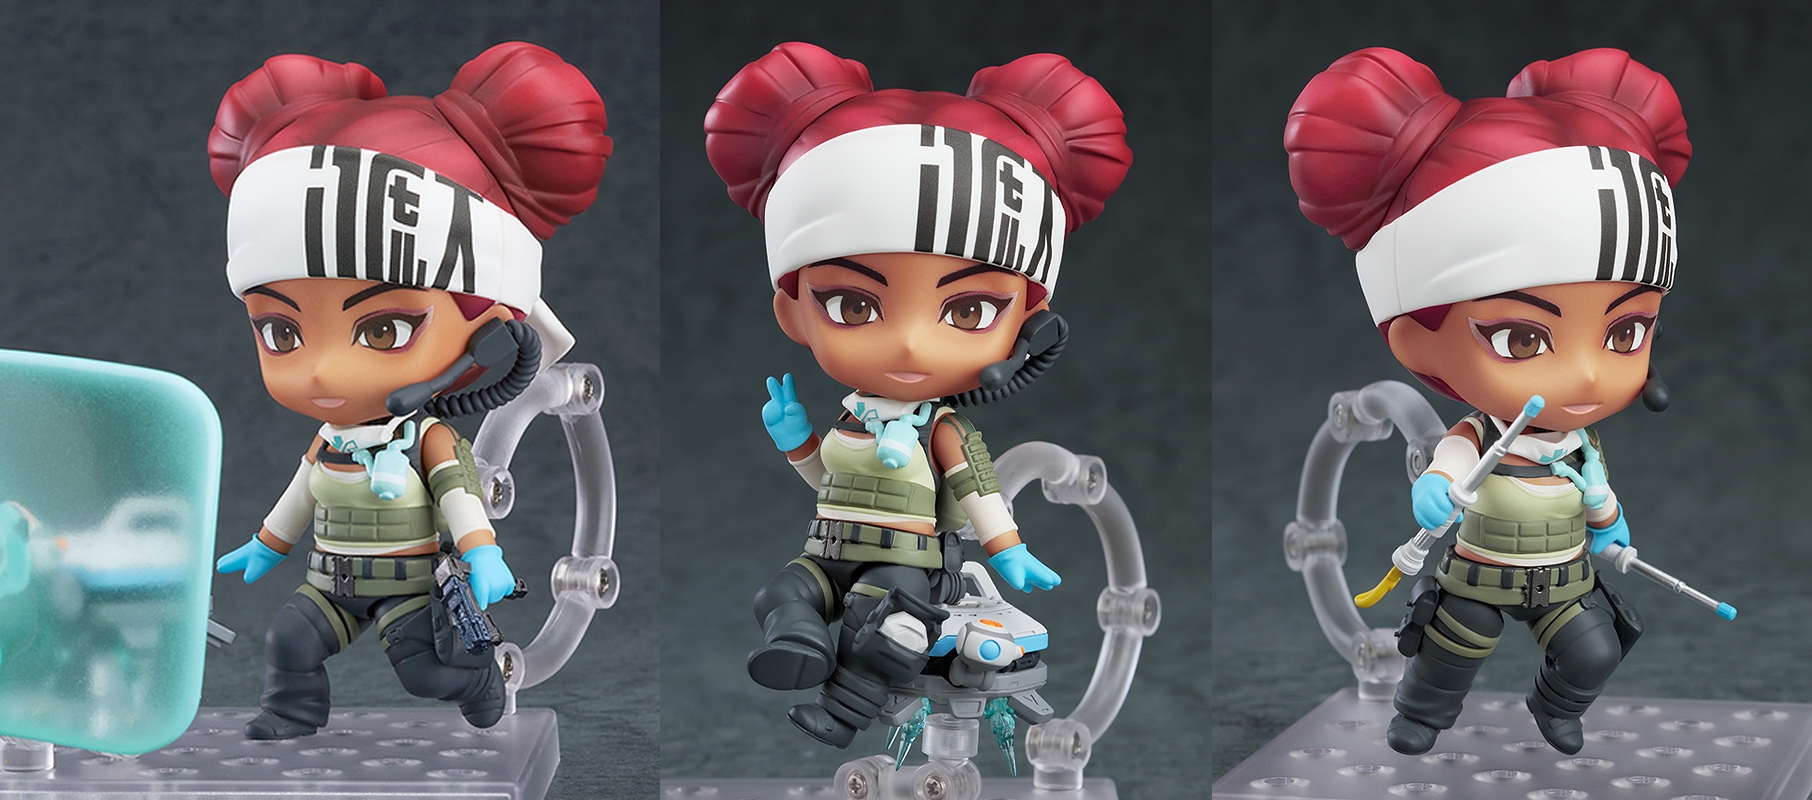 Lifeline From Apex Legends Will Soon Make Her Nendoroid Debut By Good Smile Company